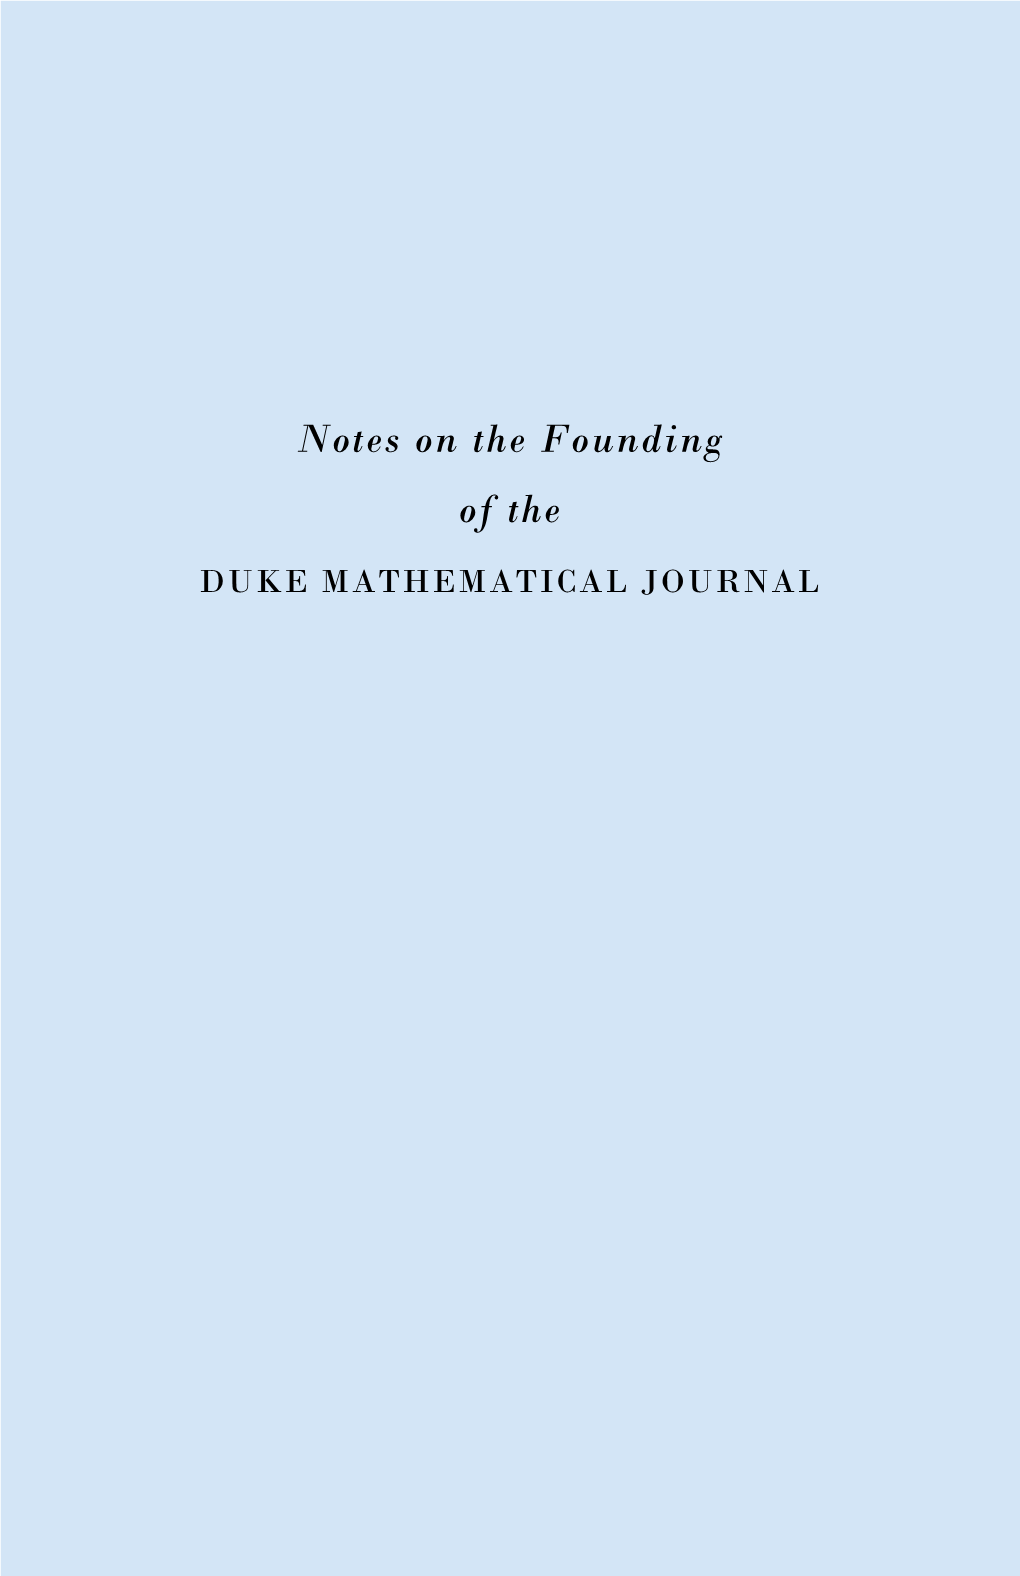 Notes on the Founding of the DUKE MATHEMATICAL JOURNAL